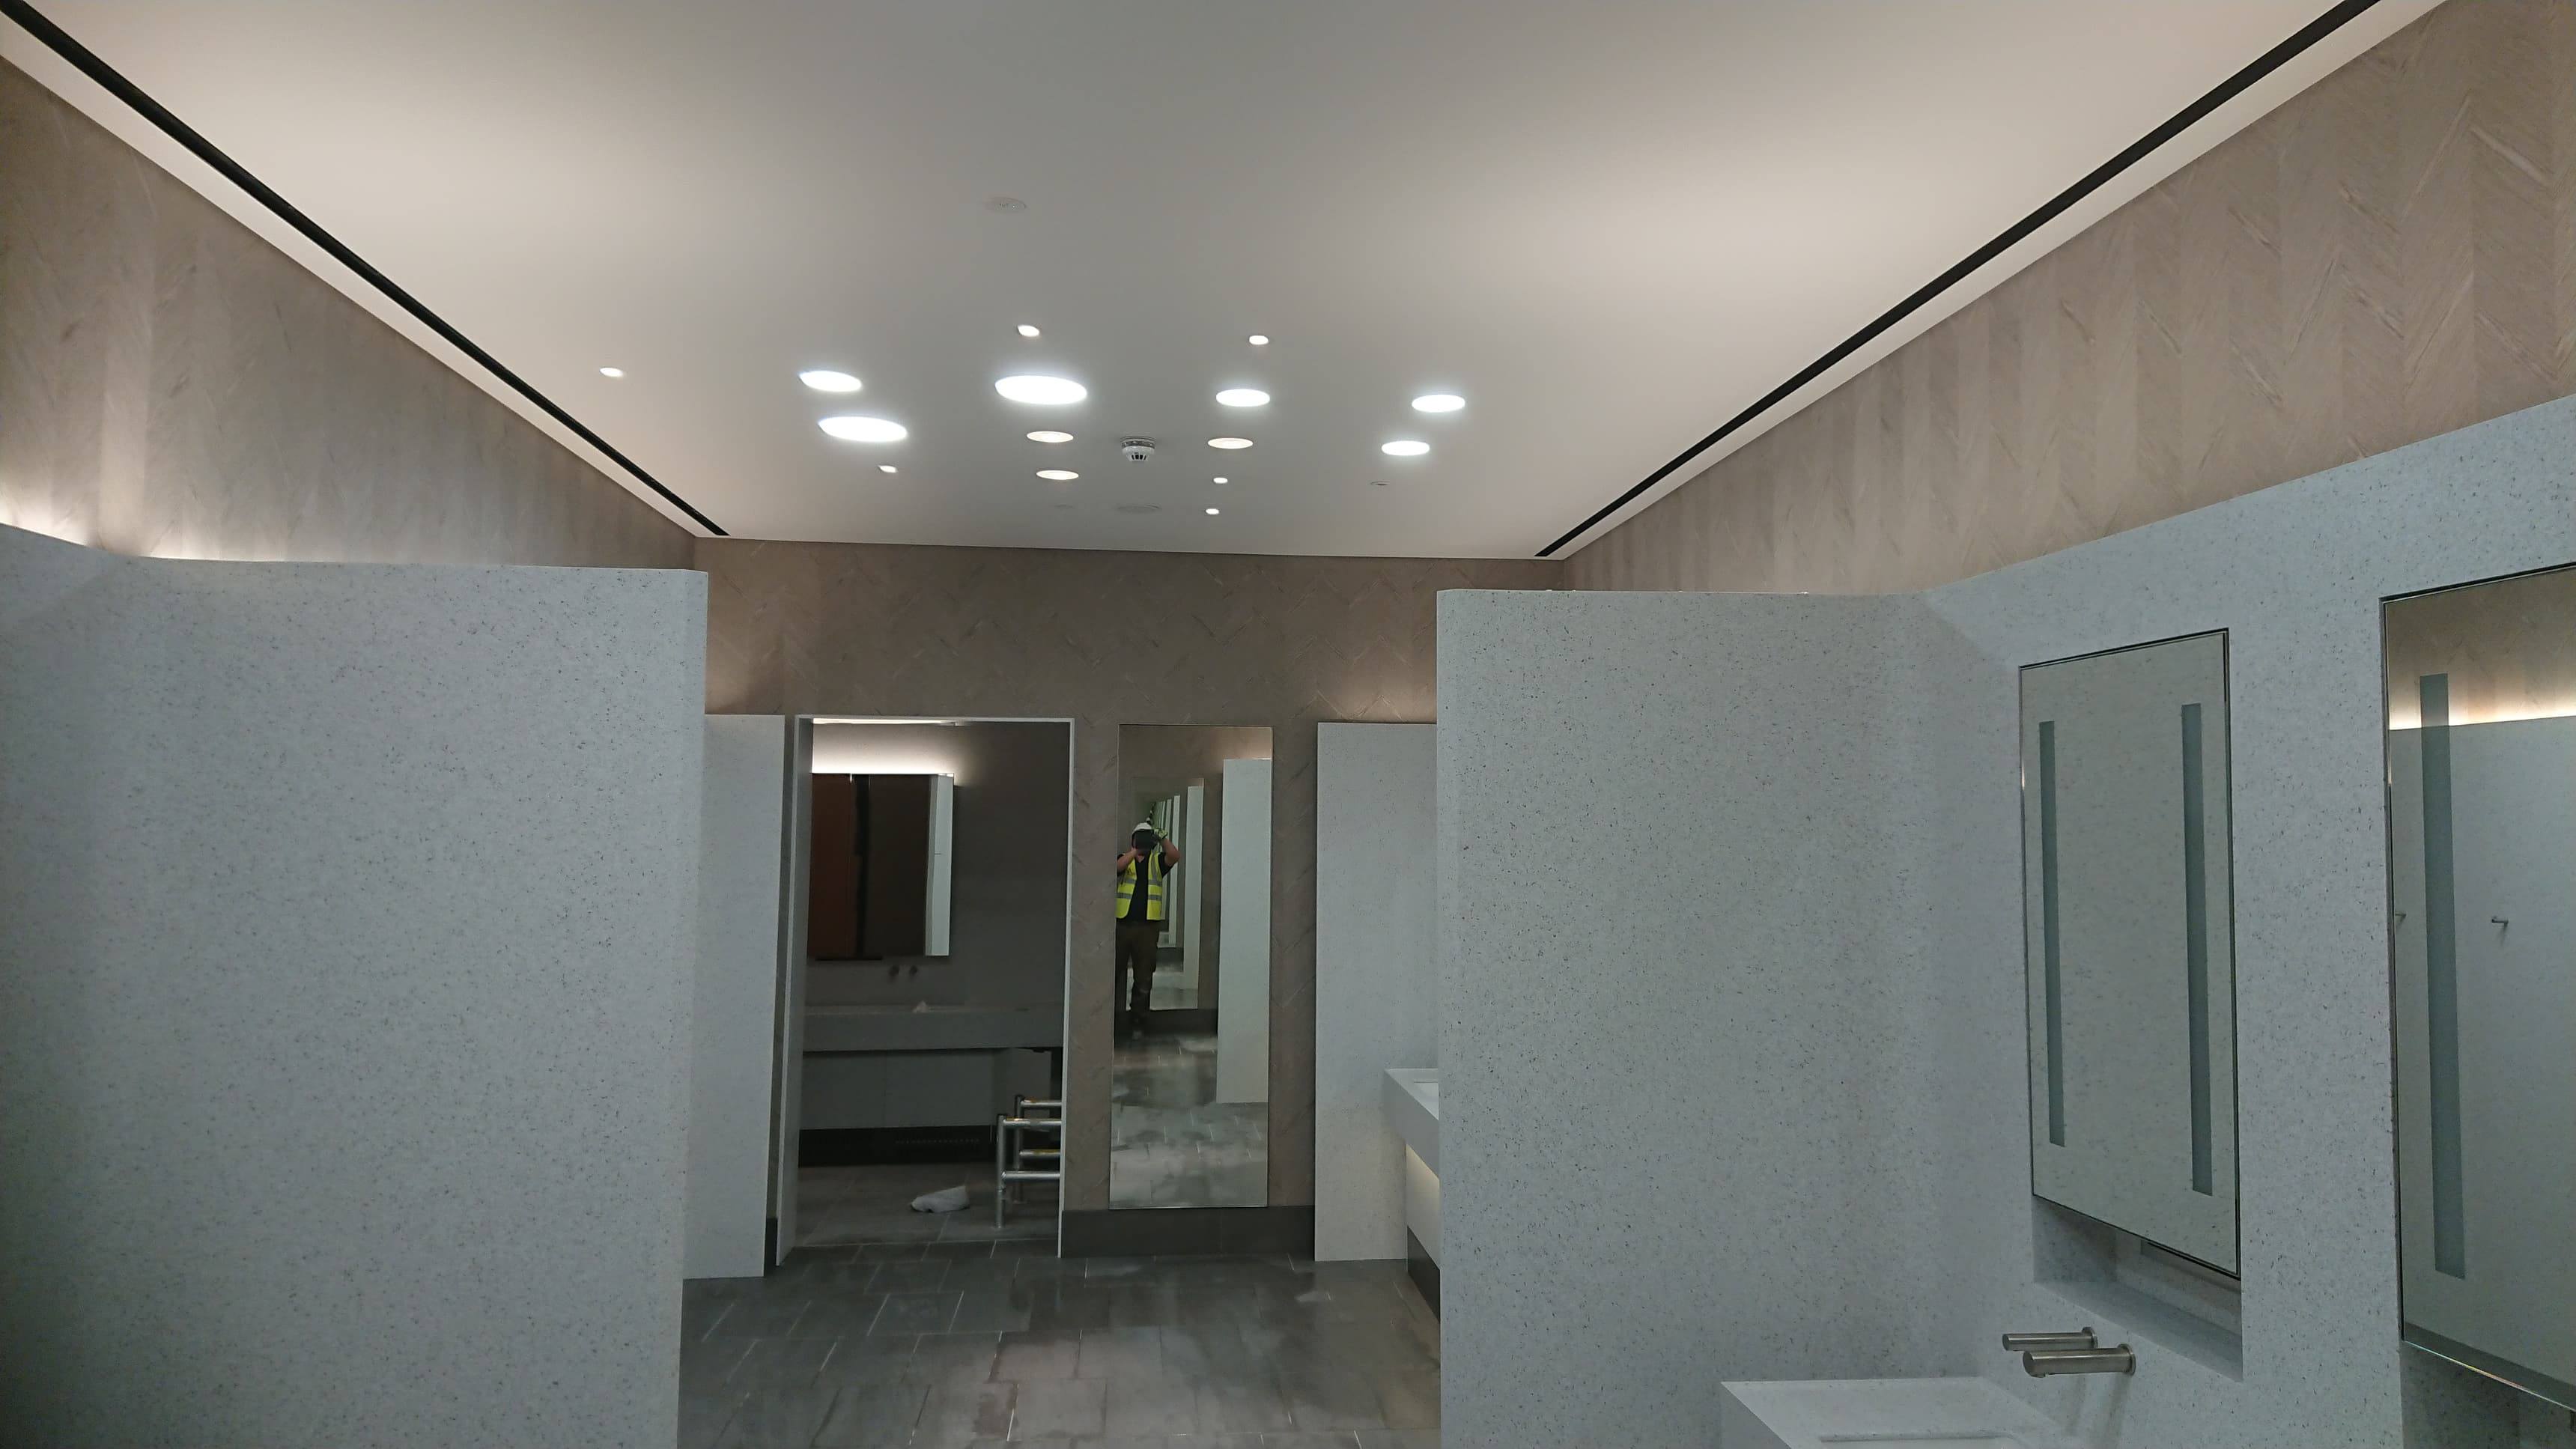 Plumtree Court, Shoe Lane, Central London, EC4 - Skilled Corian fitters 6